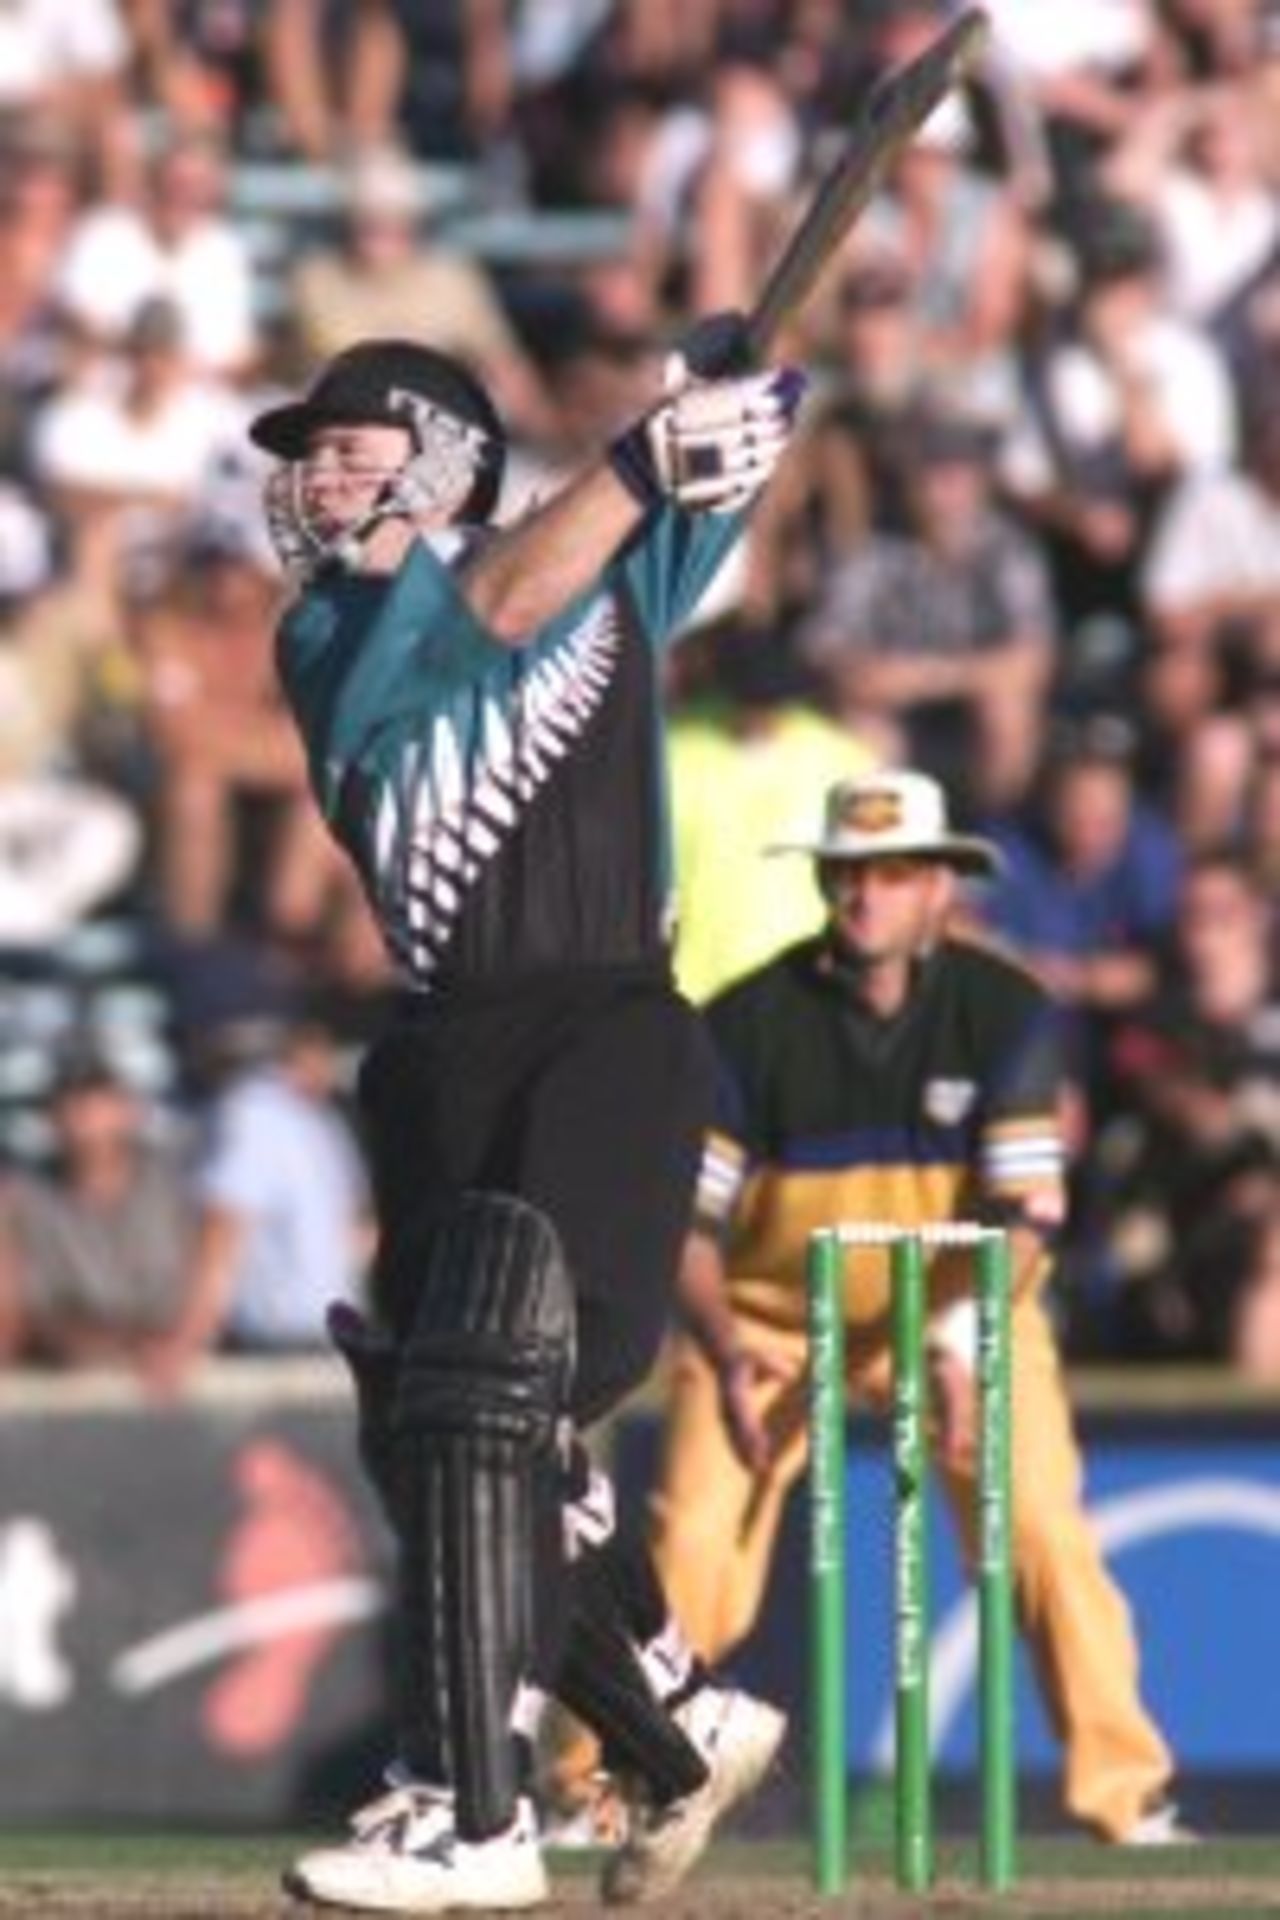 03 Mar 2000: Chris Nevin of New Zealand hits out, during the sixth one day match between New Zealand and Australia at Eden Park, Auckland, New Zealand.